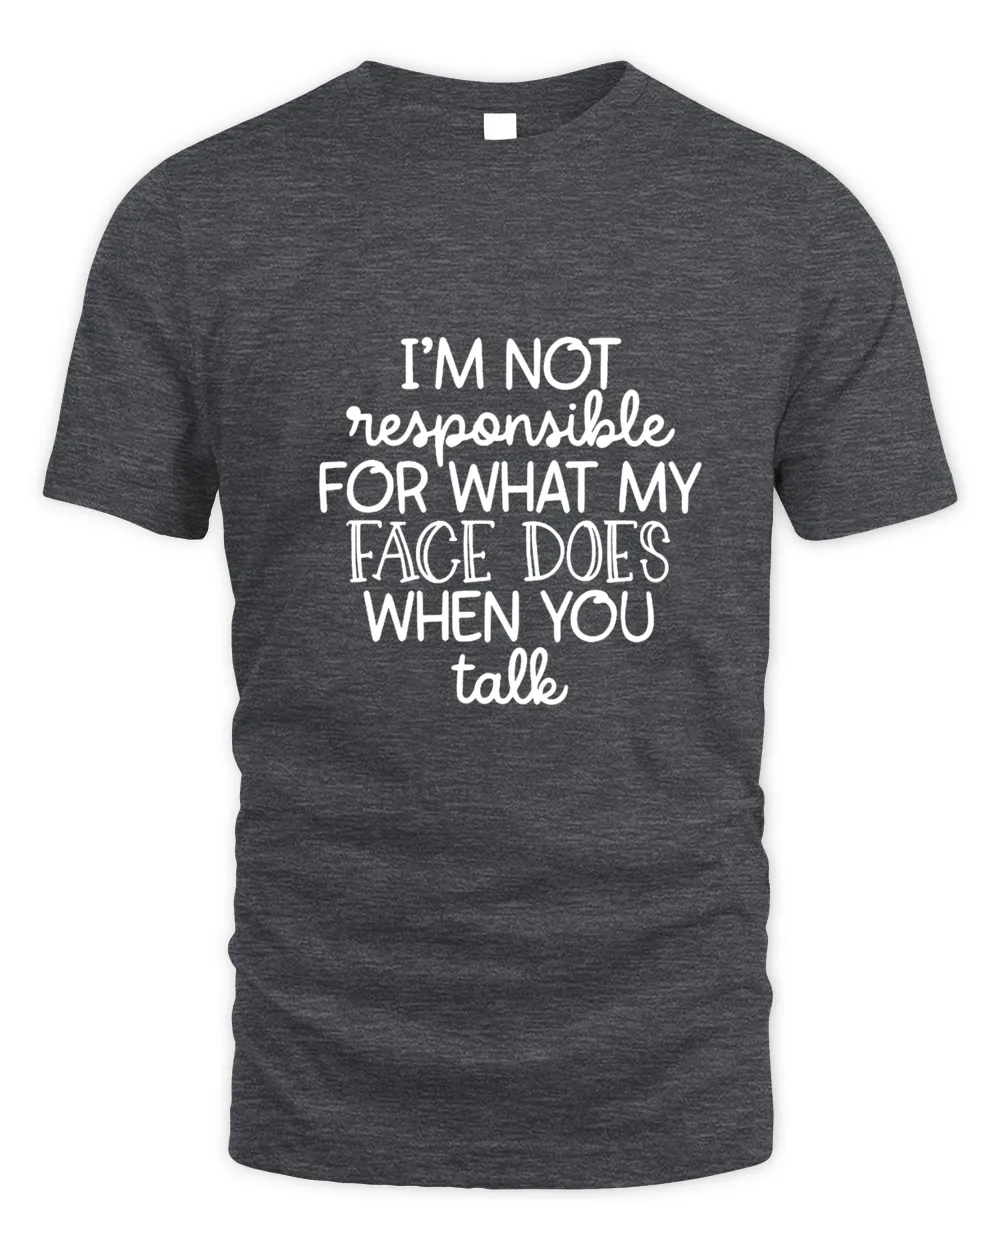 I'm Not Responsible For What My Face Does When You Talk T-Shirt, Responsible Quote Shirt,Sarcastic Tee